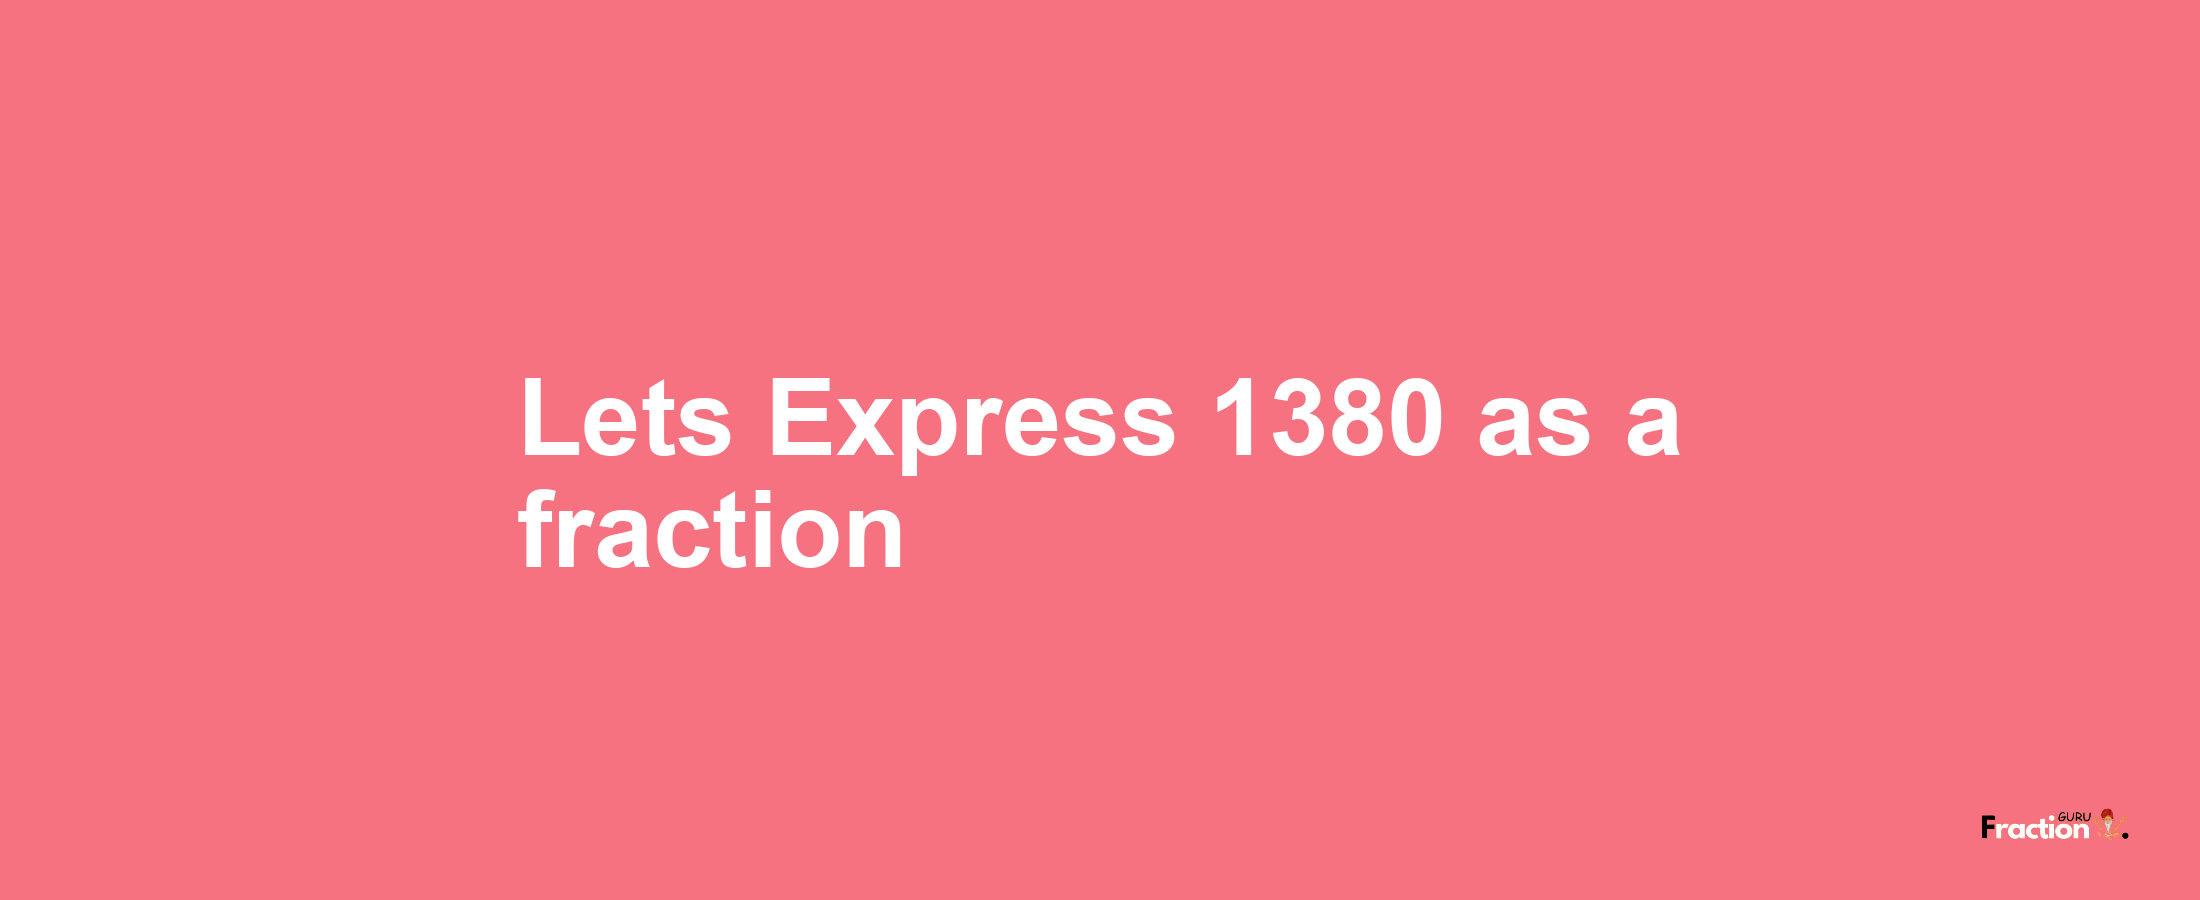 Lets Express 1380 as afraction